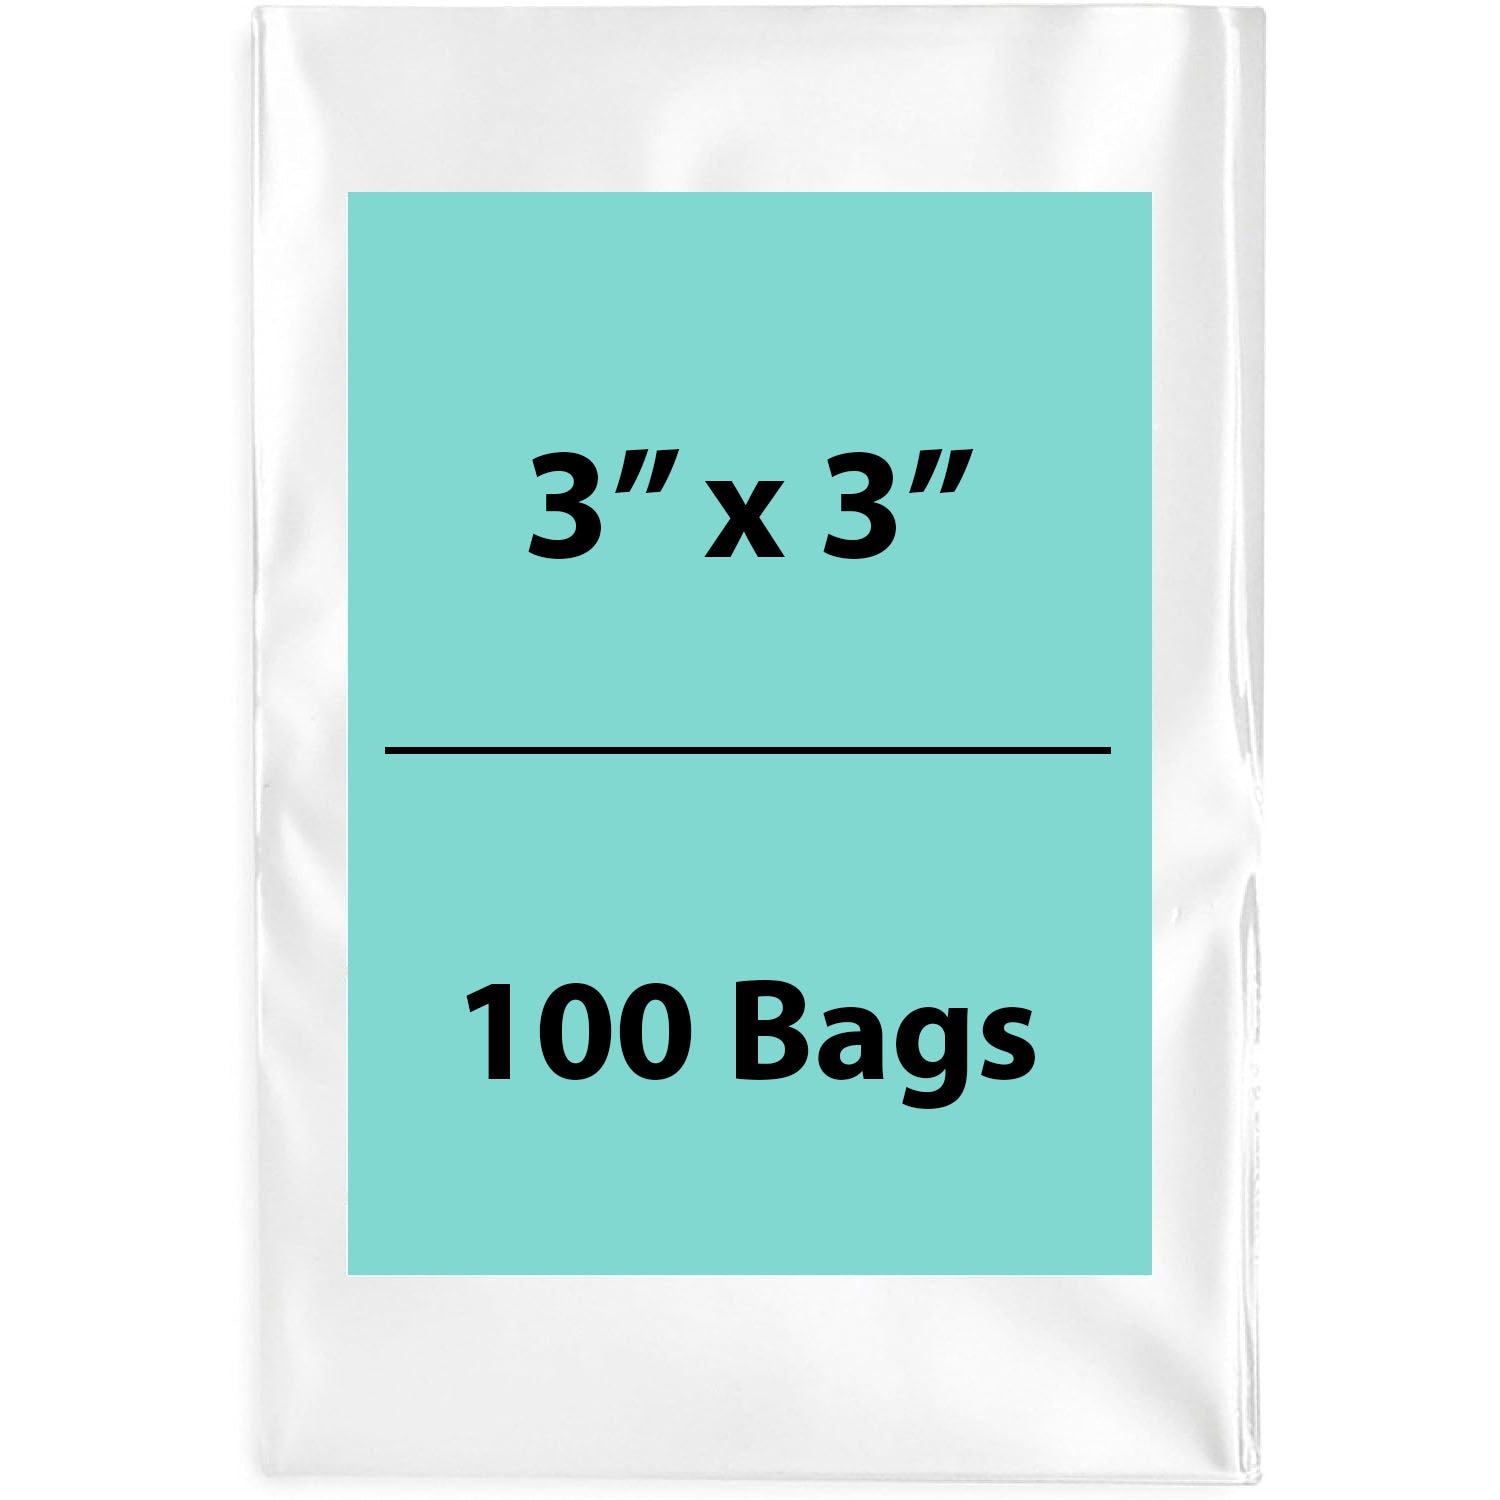 Clear Poly Bags 2Mil 3X3 Flat Open Top (LDPE)